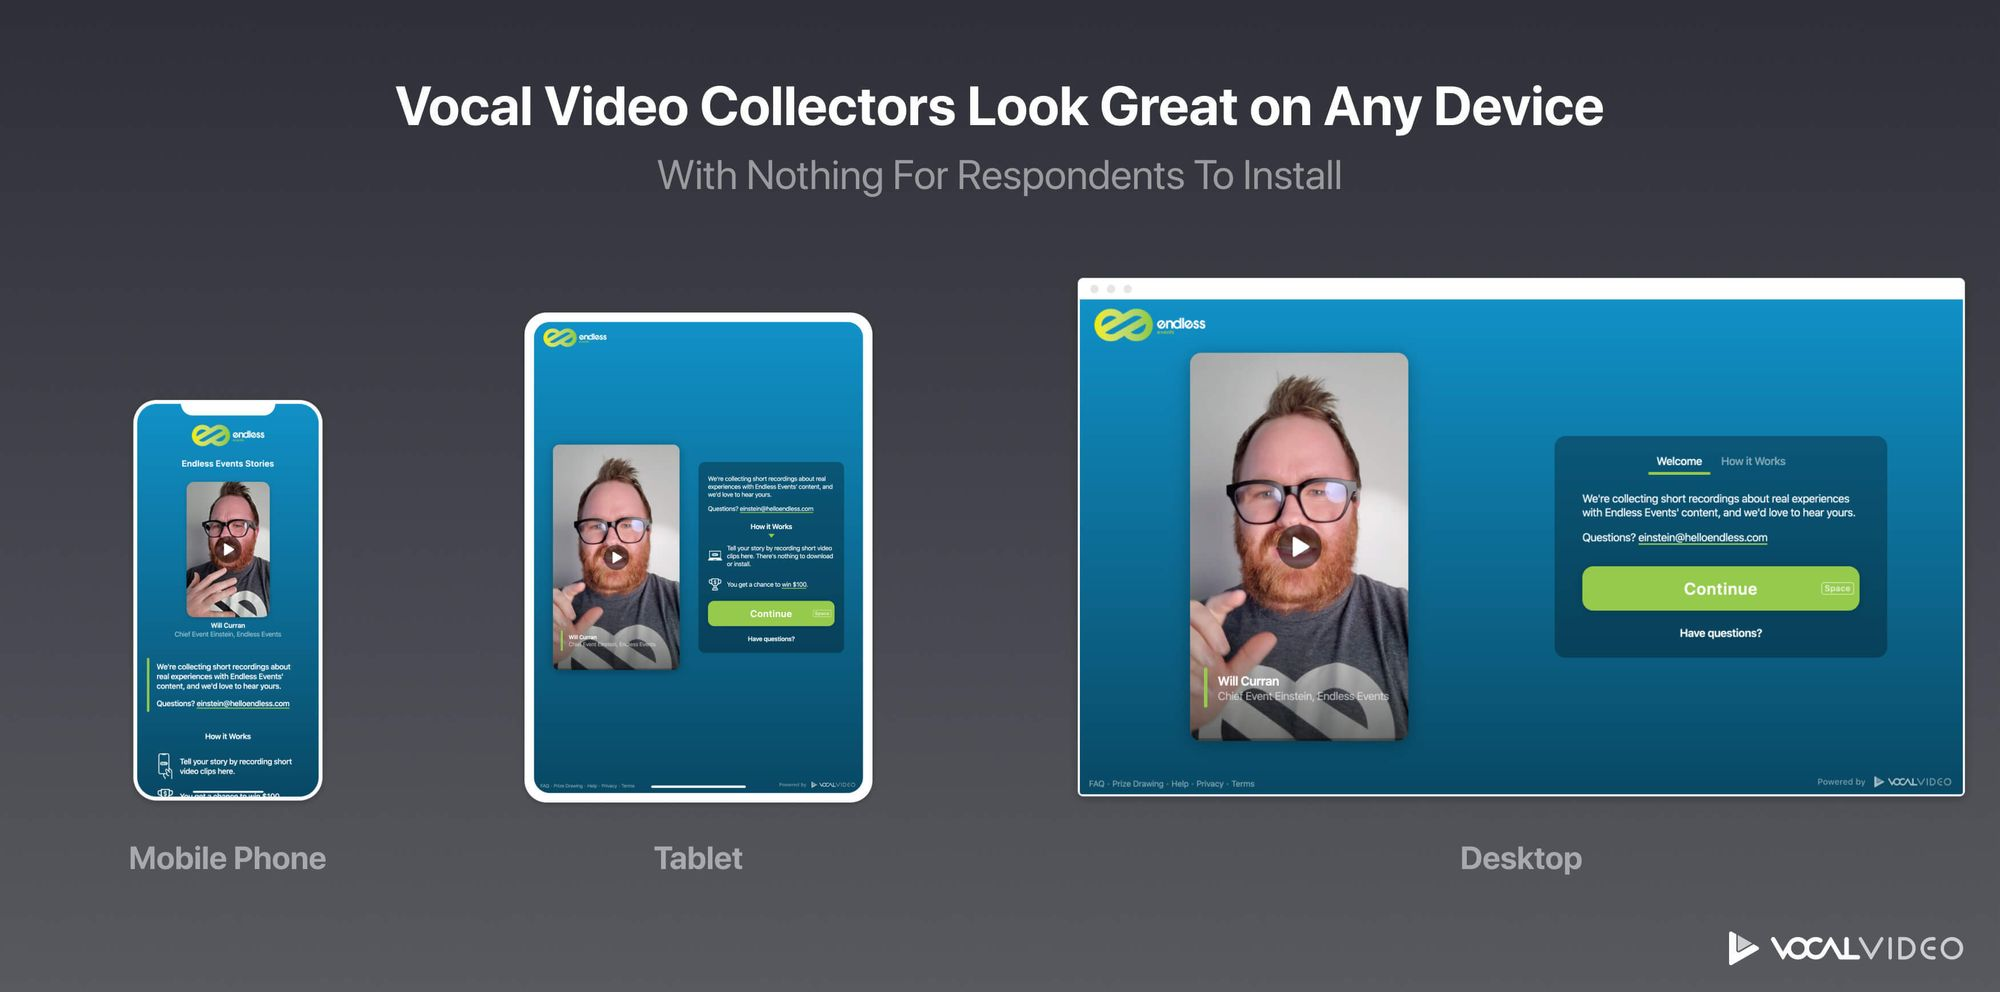 Vocal Video Collectors Look Great on Any Device: Mobile Phone, Tablet, and Desktop